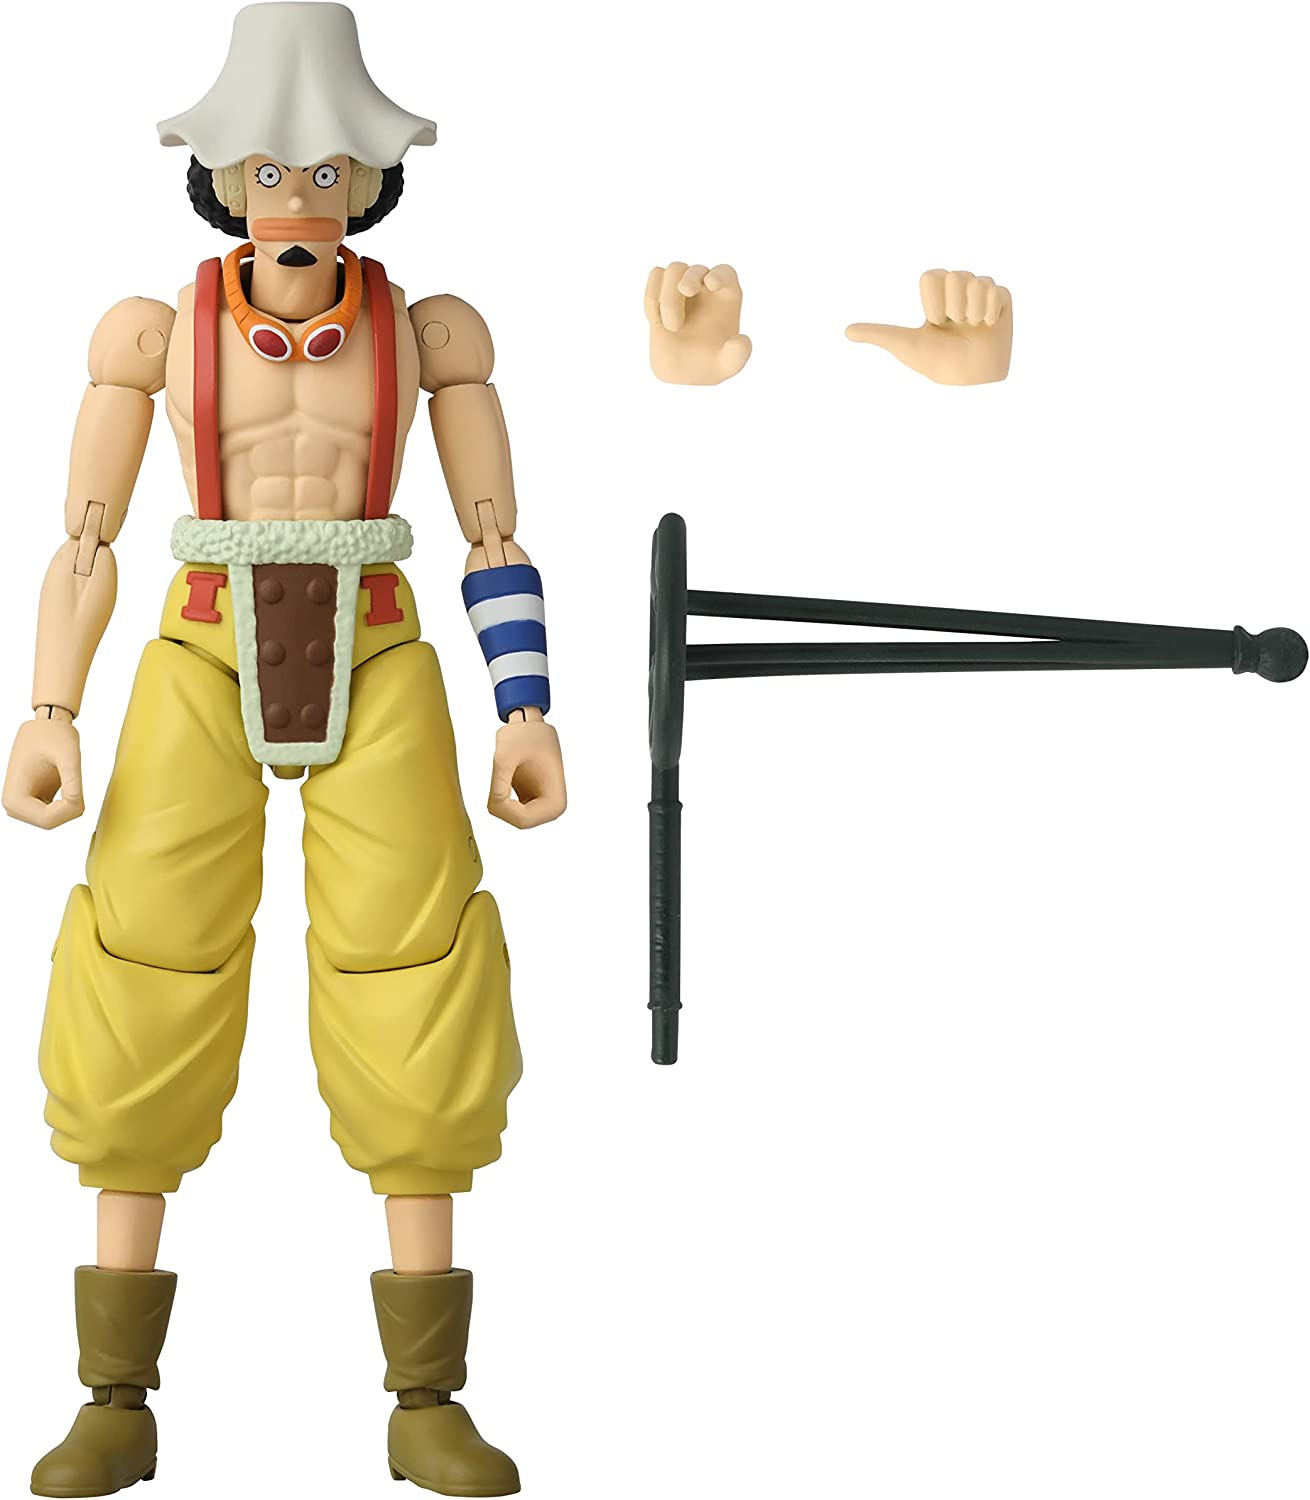 One Piece - Monkey D. Luffy - Anime Heroes - Bandai action figure